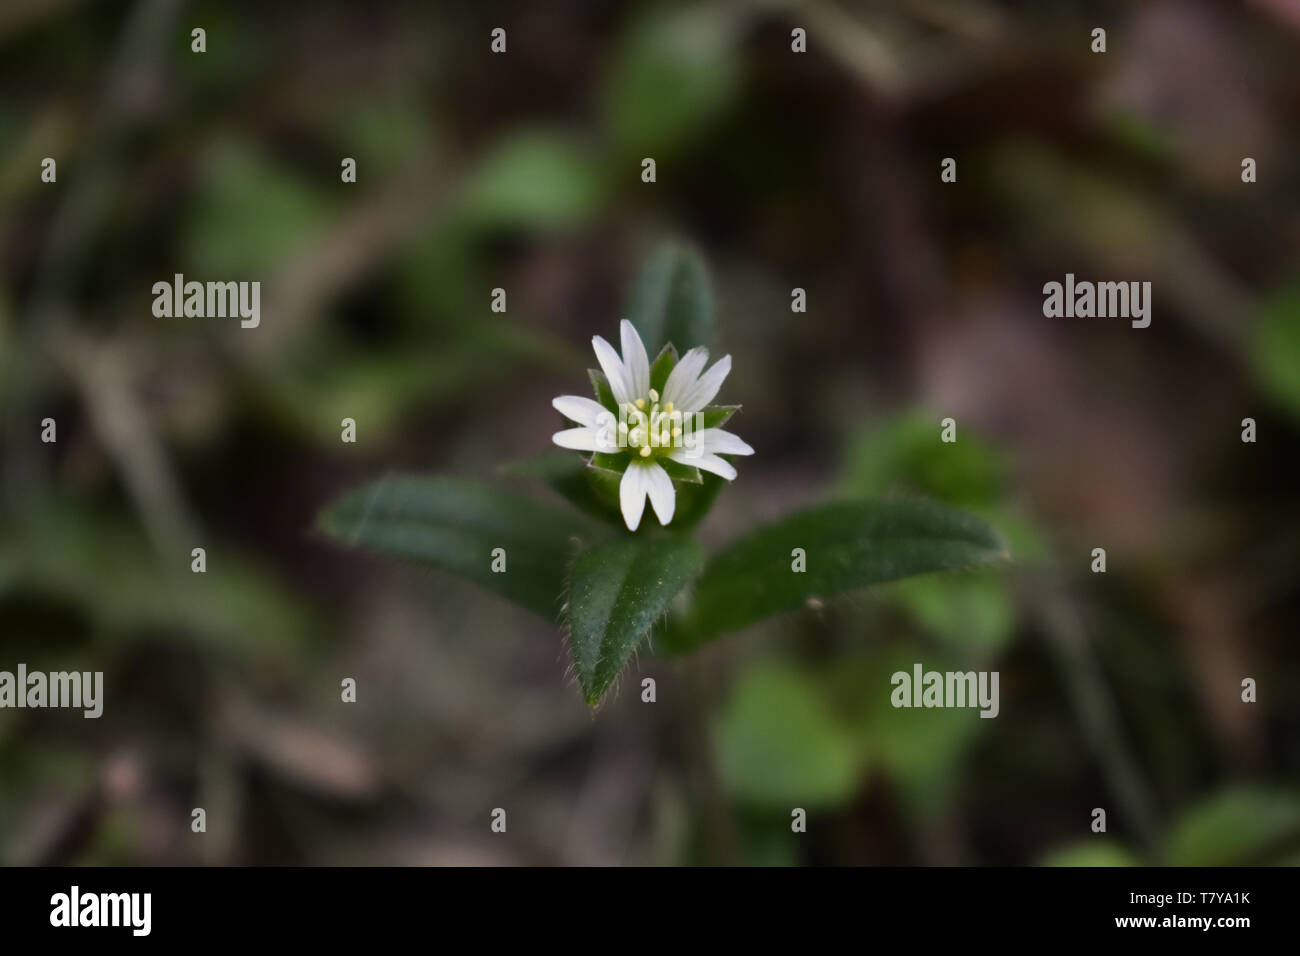 Spring wildflower with white petals. Chickweed. Stock Photo